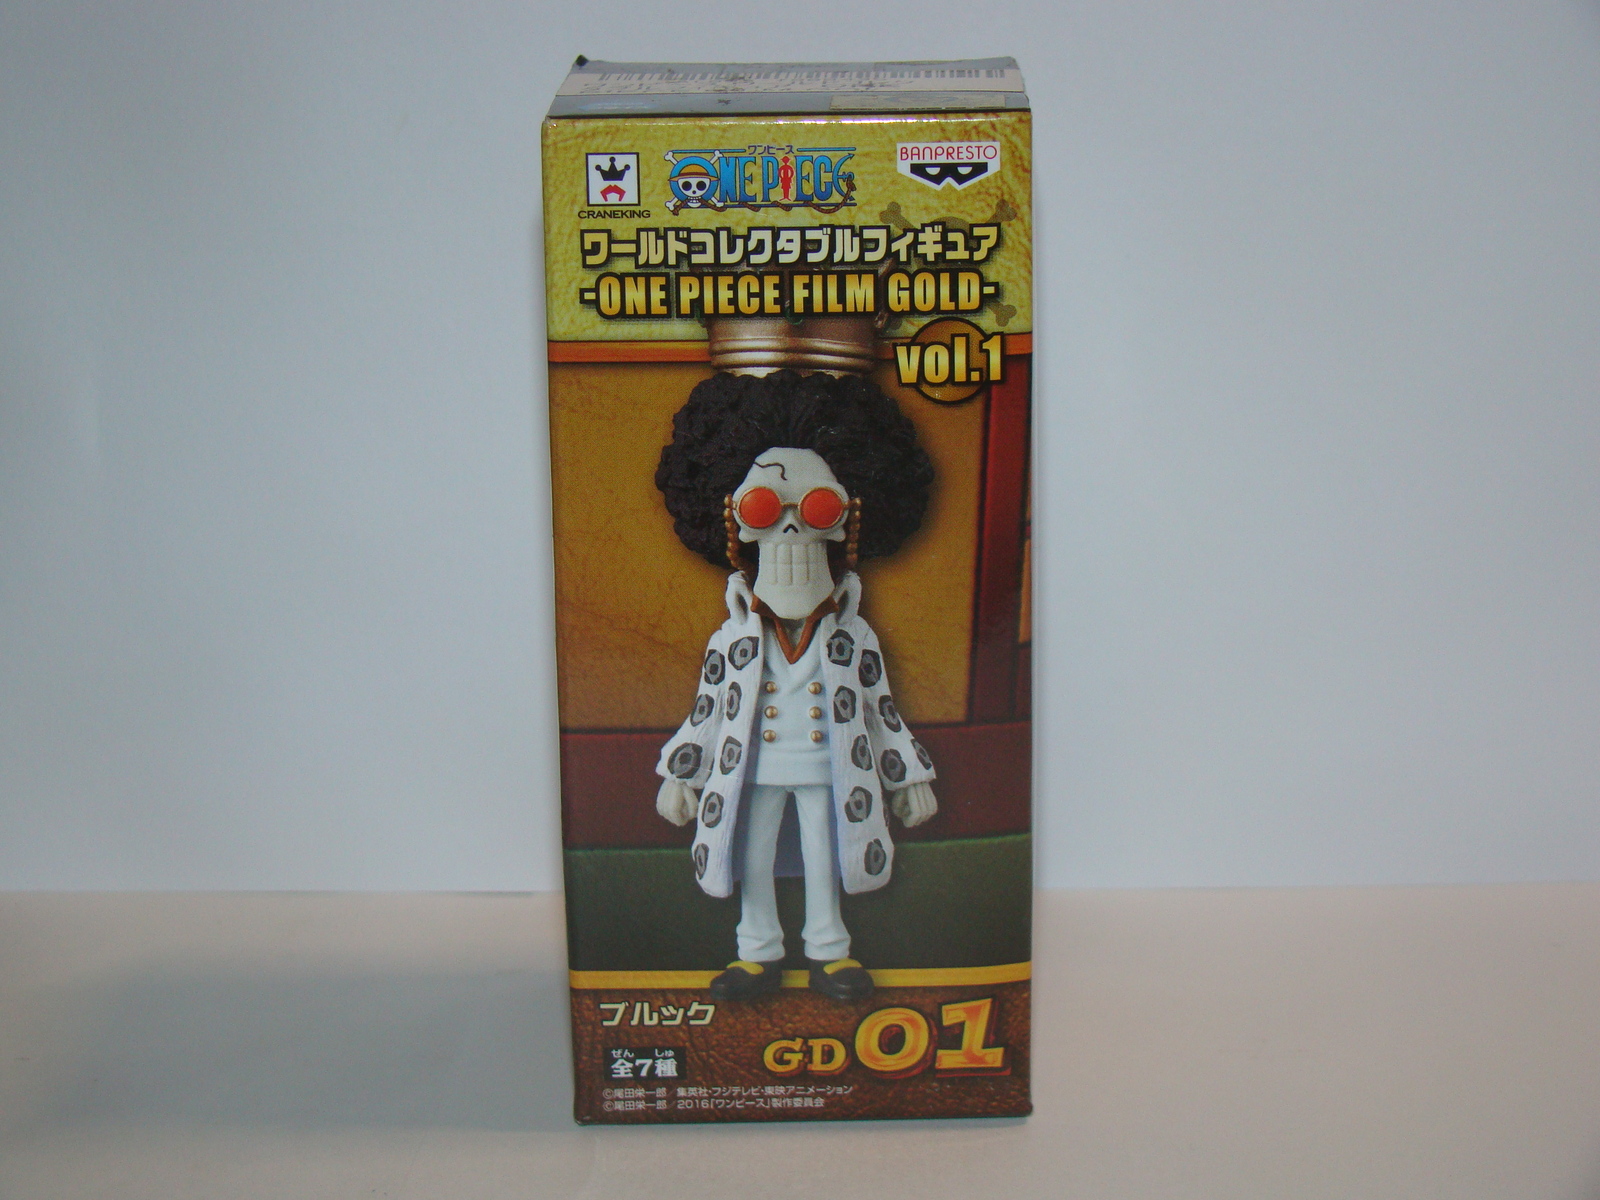 Primary image for World Collectible Figure - ONE PIECE FILM GOLD - Vol. 1 - GD 01 Figure (New)